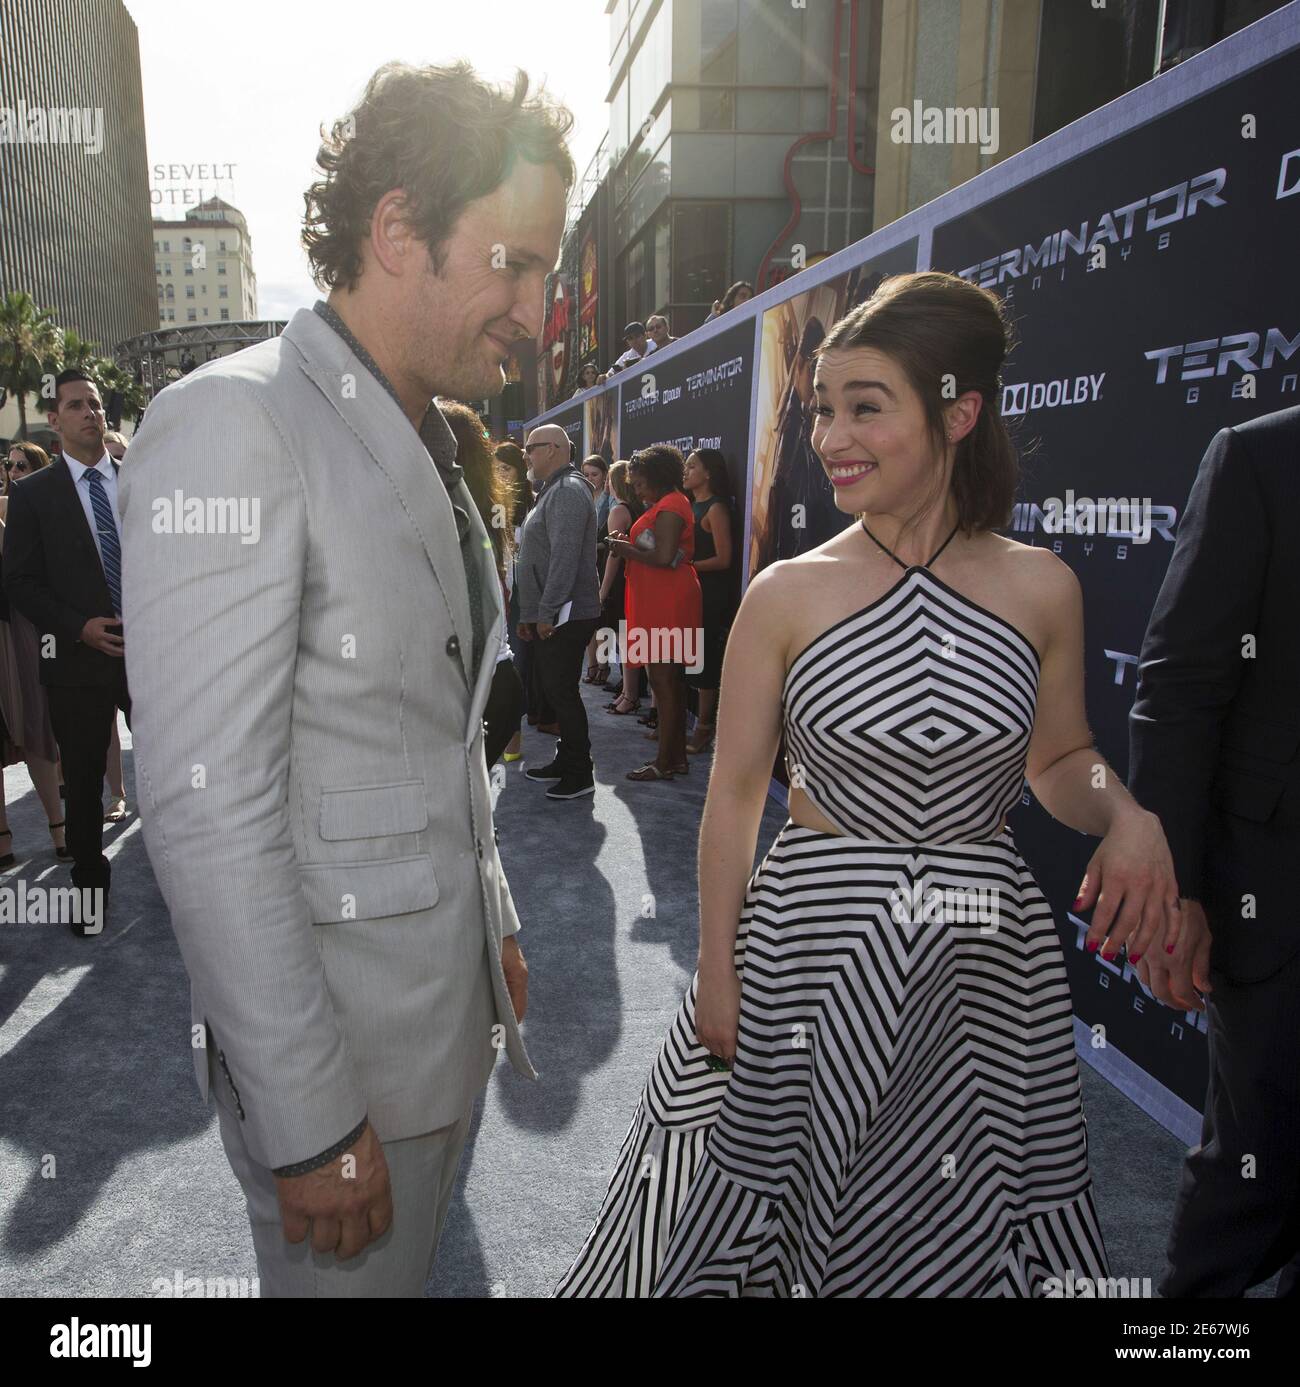 Cast members Jason Clarke and Emilia Clarke attend the premiere of  "Terminator Genisys" in Hollywood, California June 28, 2015. The movie  opens in the U.S. on July 1. REUTERS/Mario Anzuoni Stock Photo - Alamy